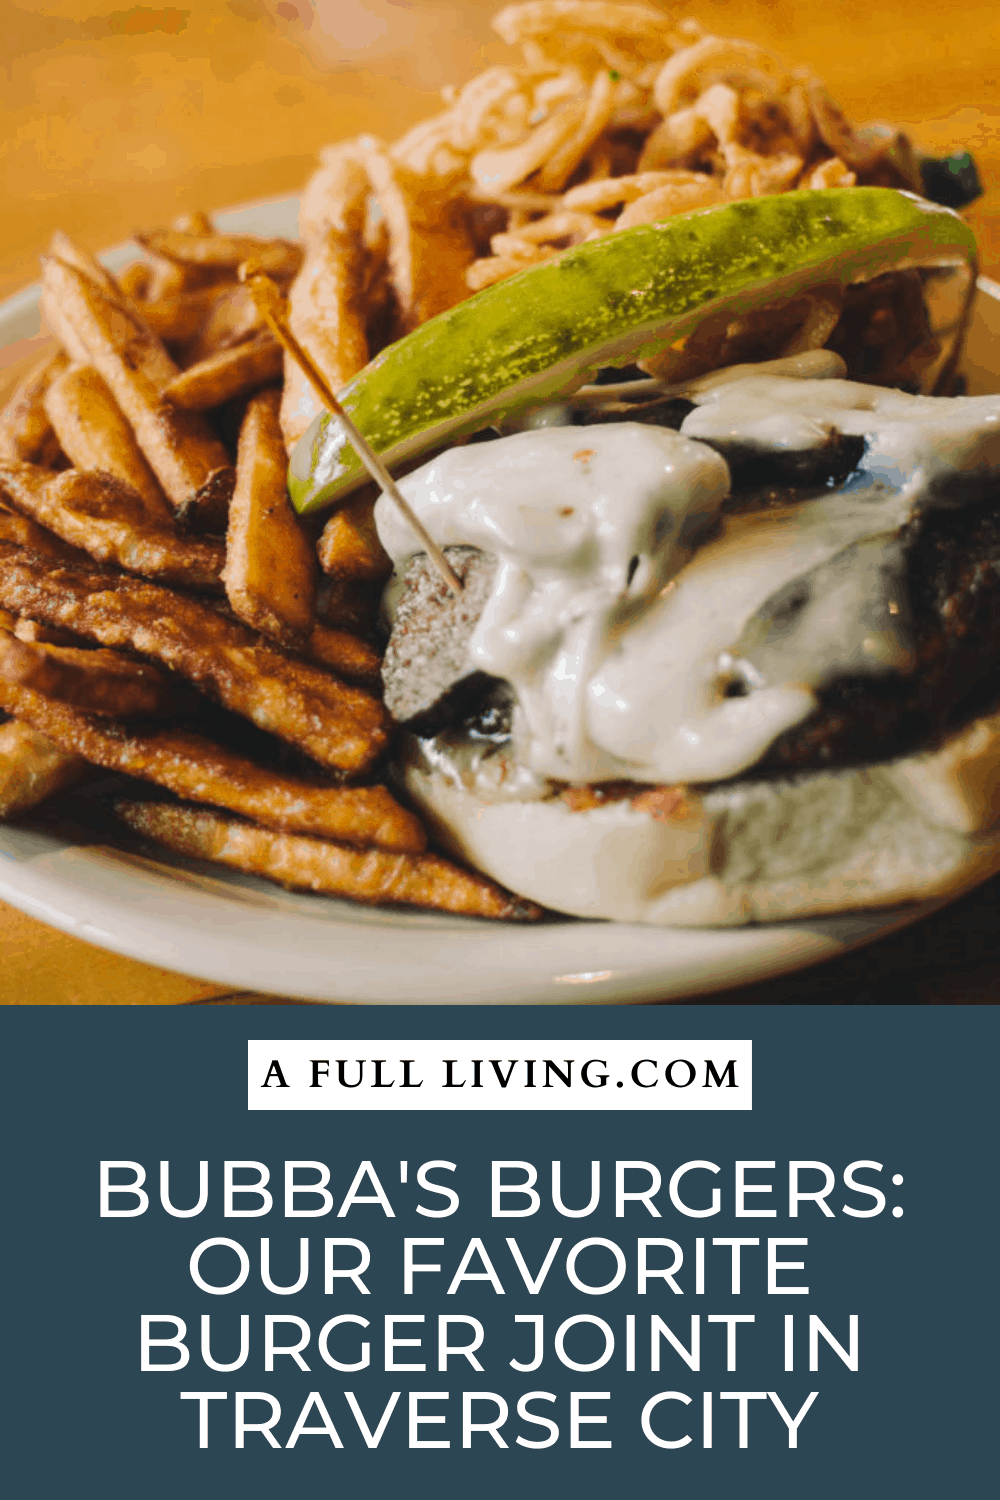 Bubba's Burgers: Our Favorite Burger Joint In Traverse City graphic with text